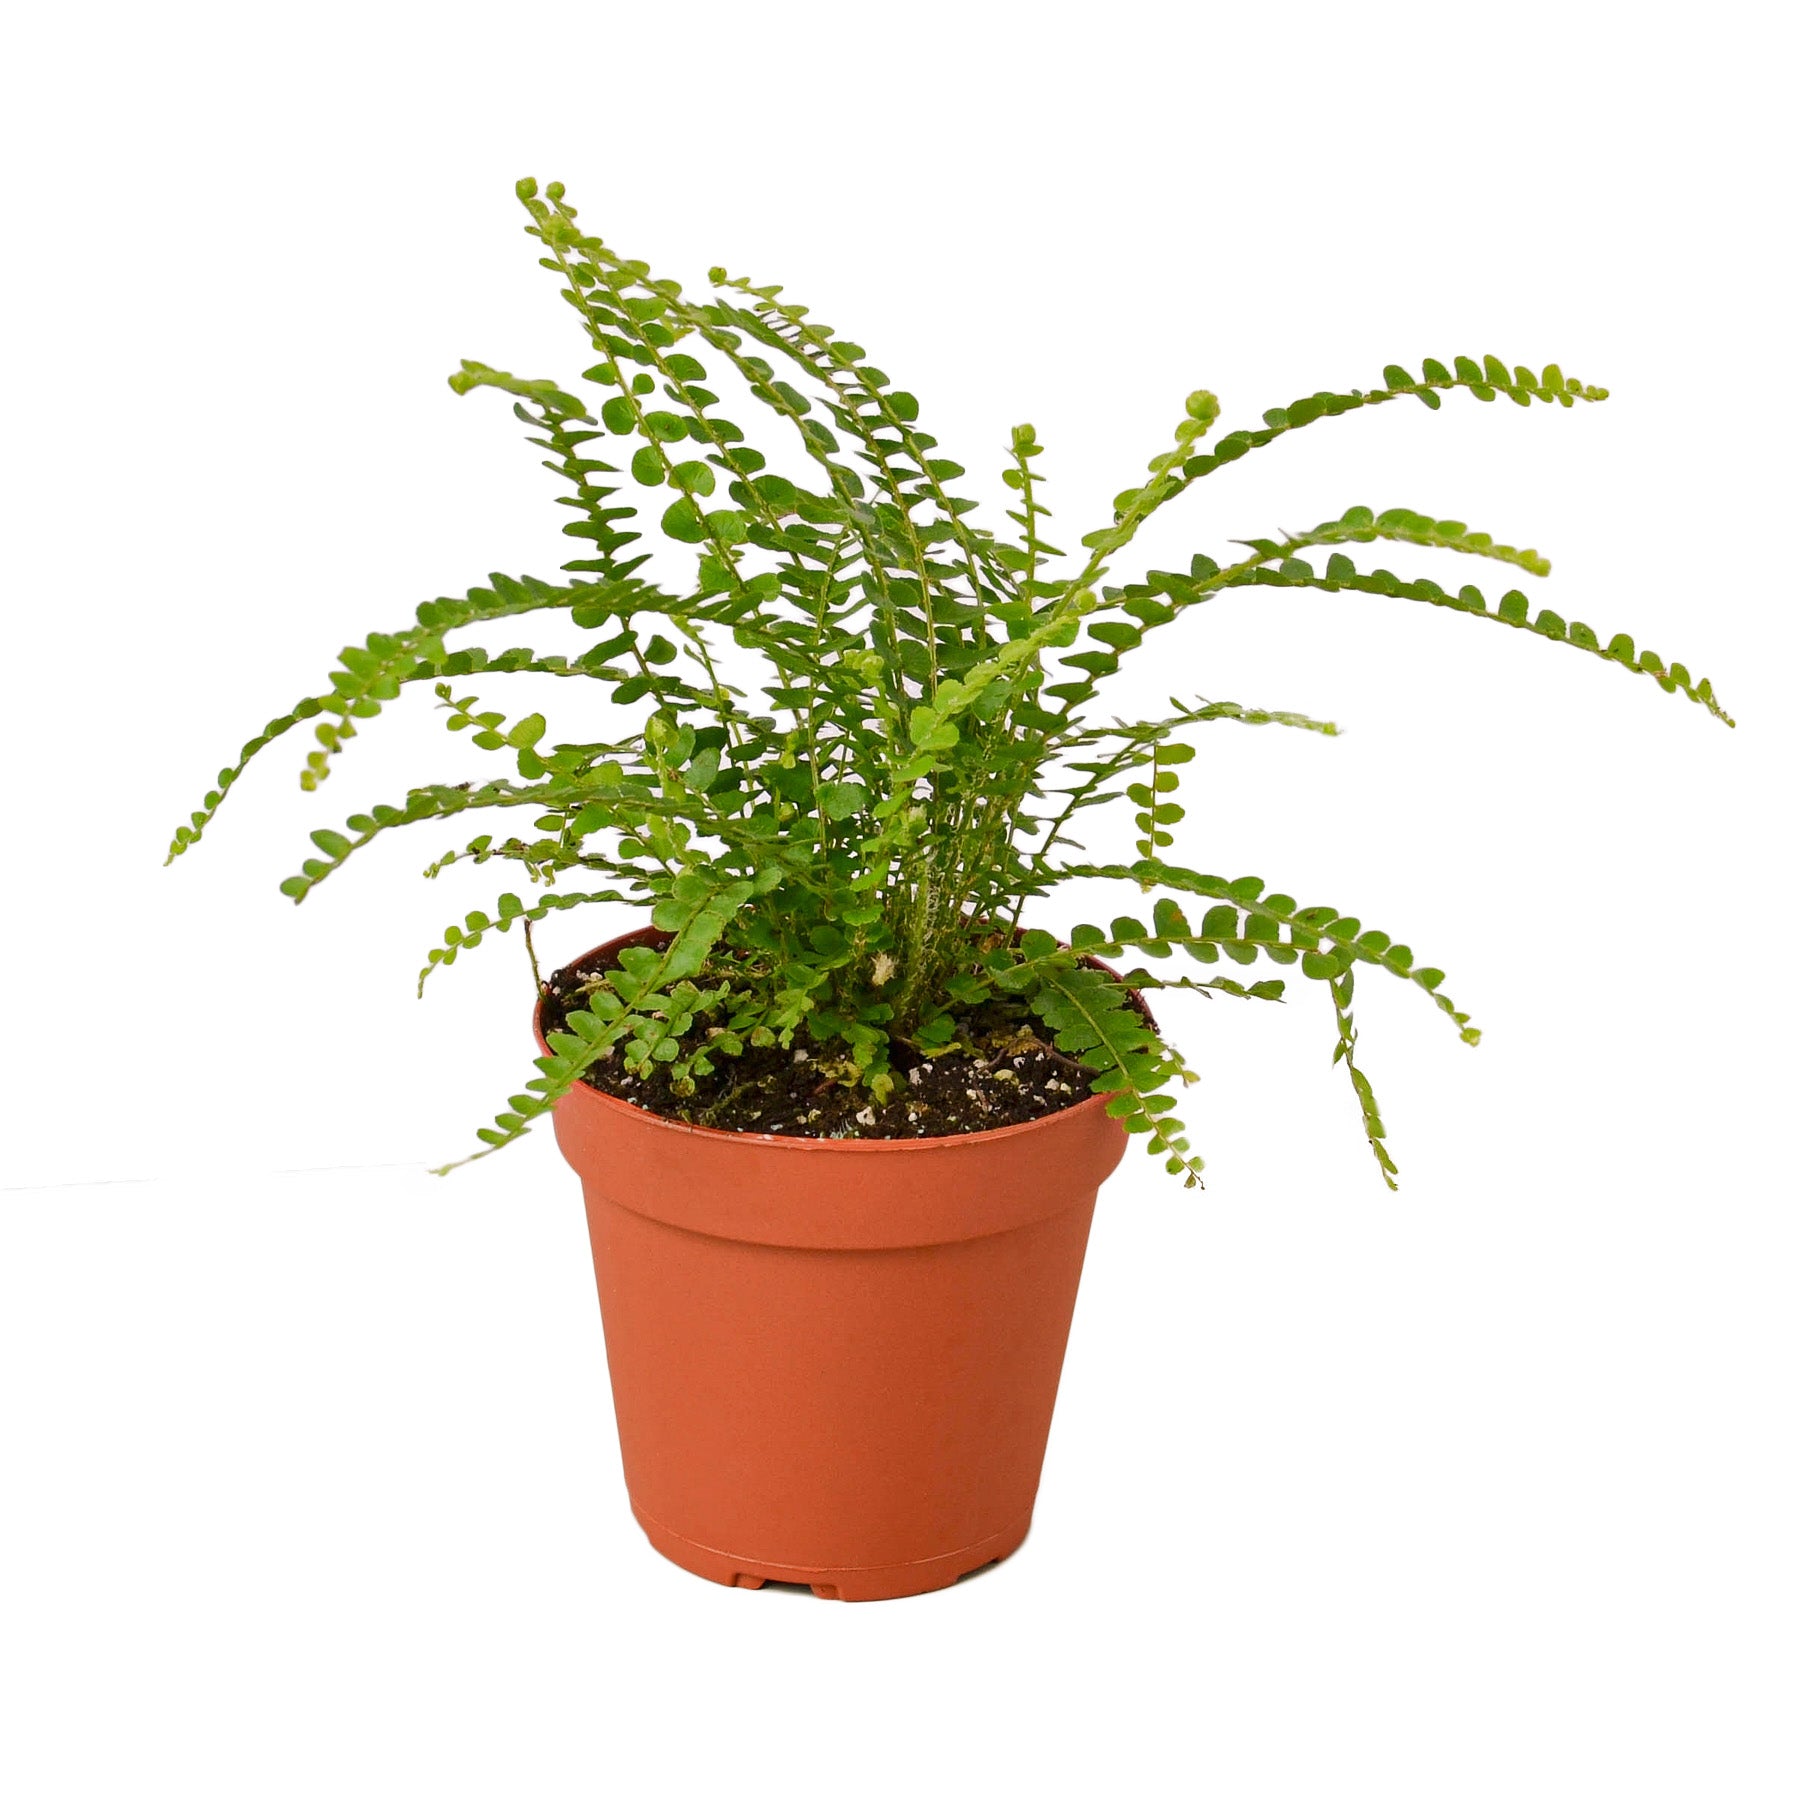 A small plant in a pot on a background.